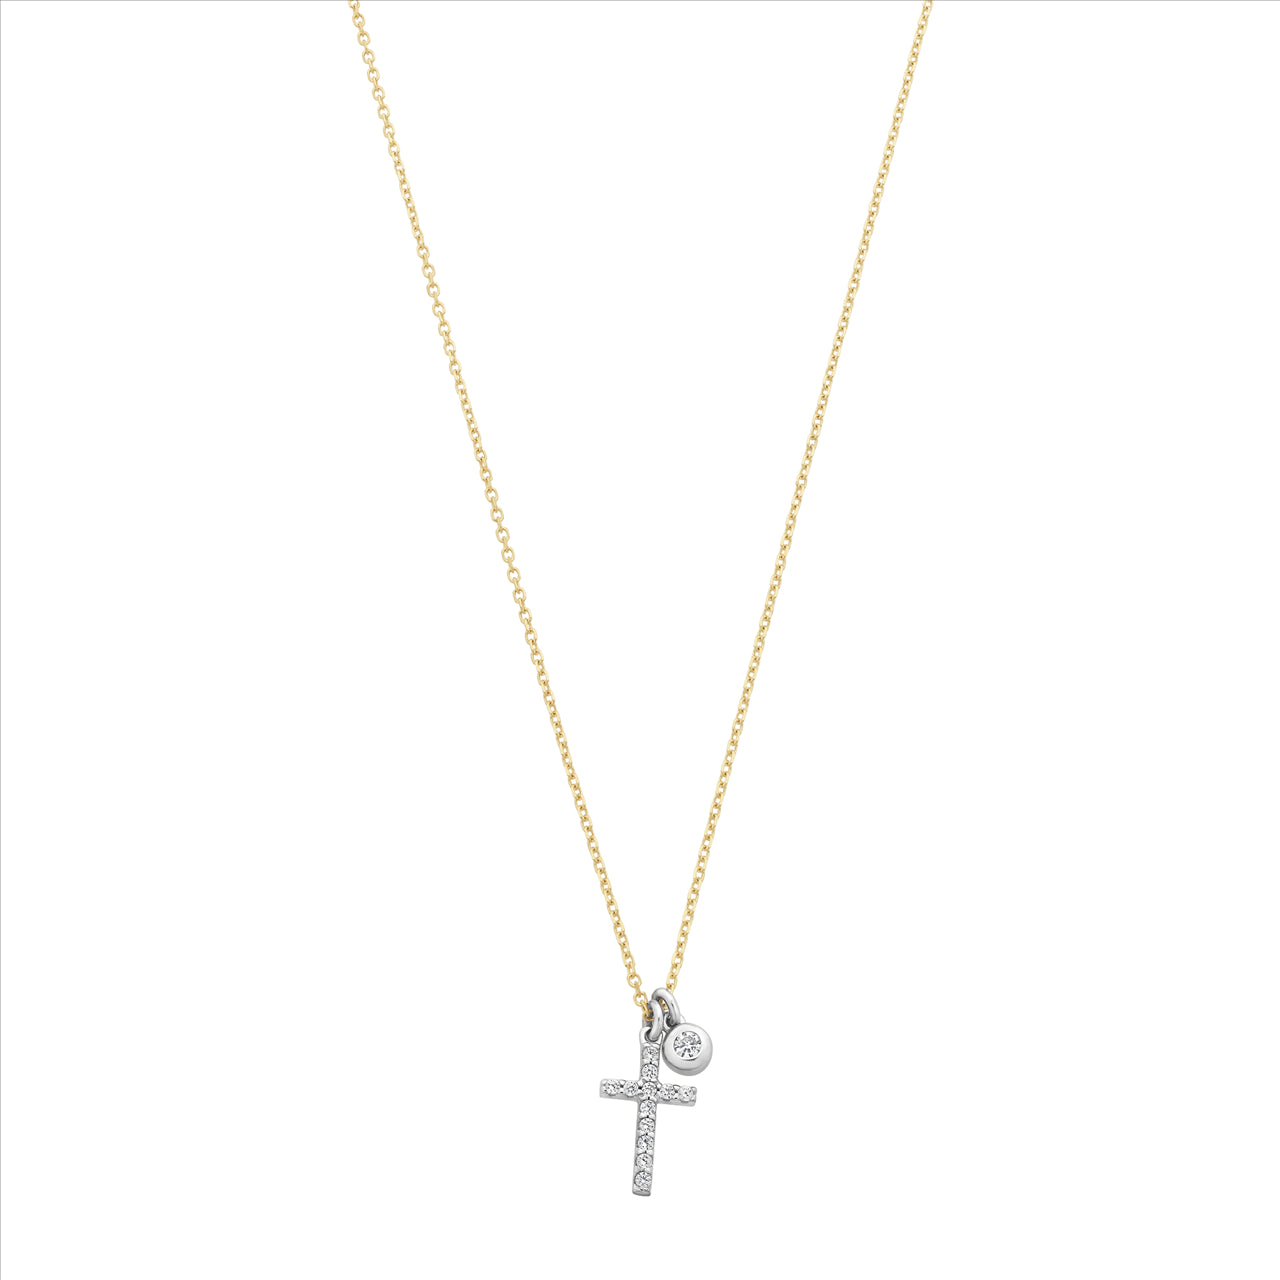 9ct White Gold Cubic Zirconia Cross & Solitaire Pendants on 9ct Yellow Gold Chain